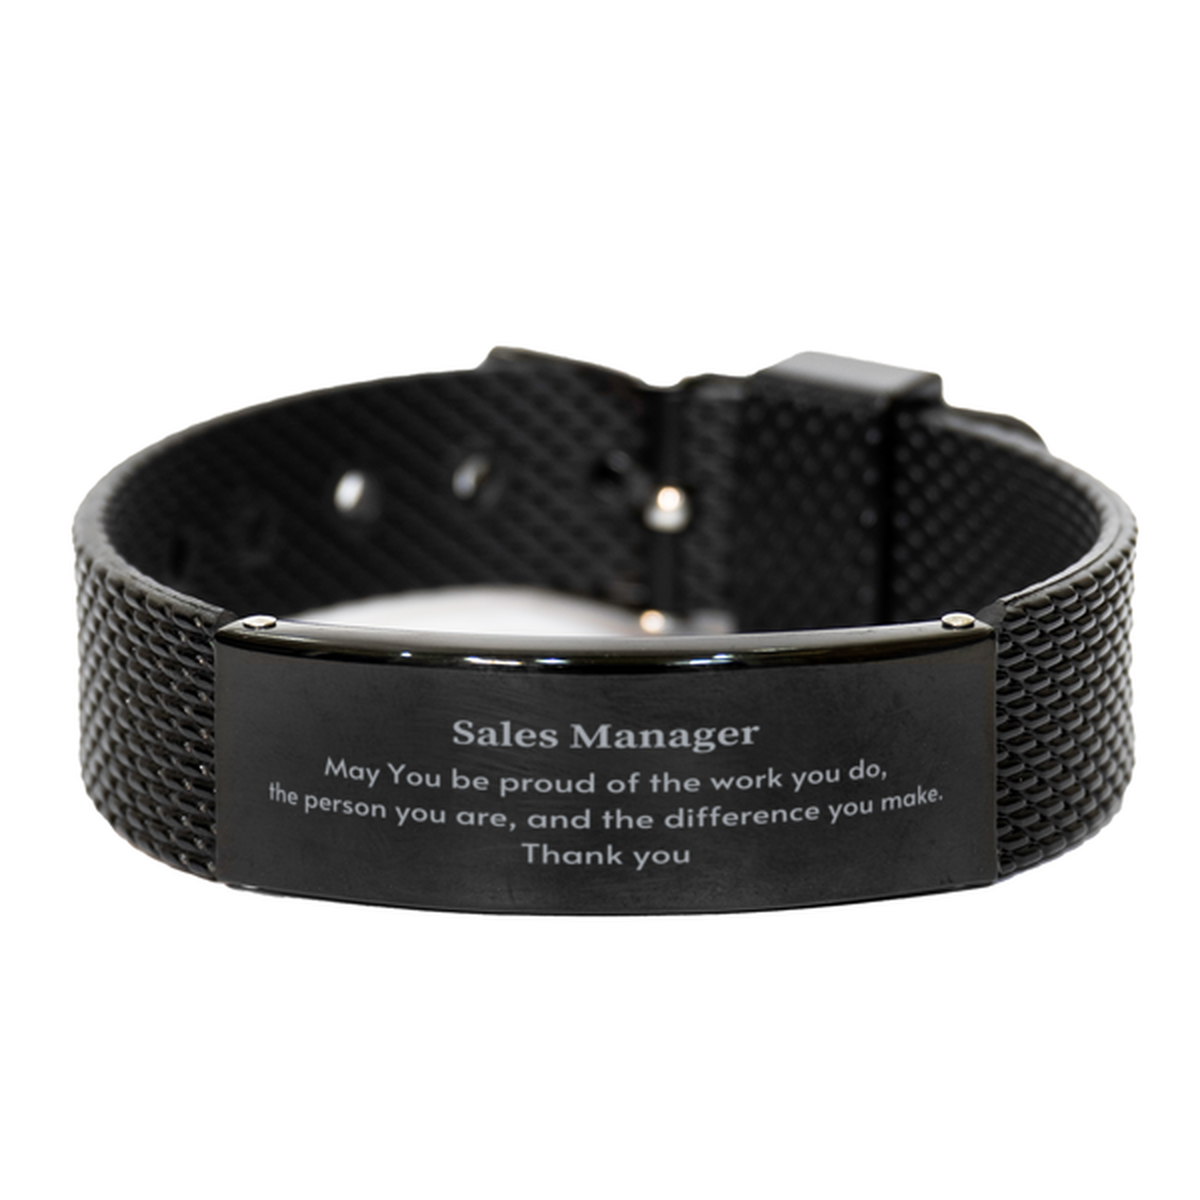 Heartwarming Black Shark Mesh Bracelet Retirement Coworkers Gifts for Sales Manager, Sales Manager May You be proud of the work you do, the person you are Gifts for Boss Men Women Friends